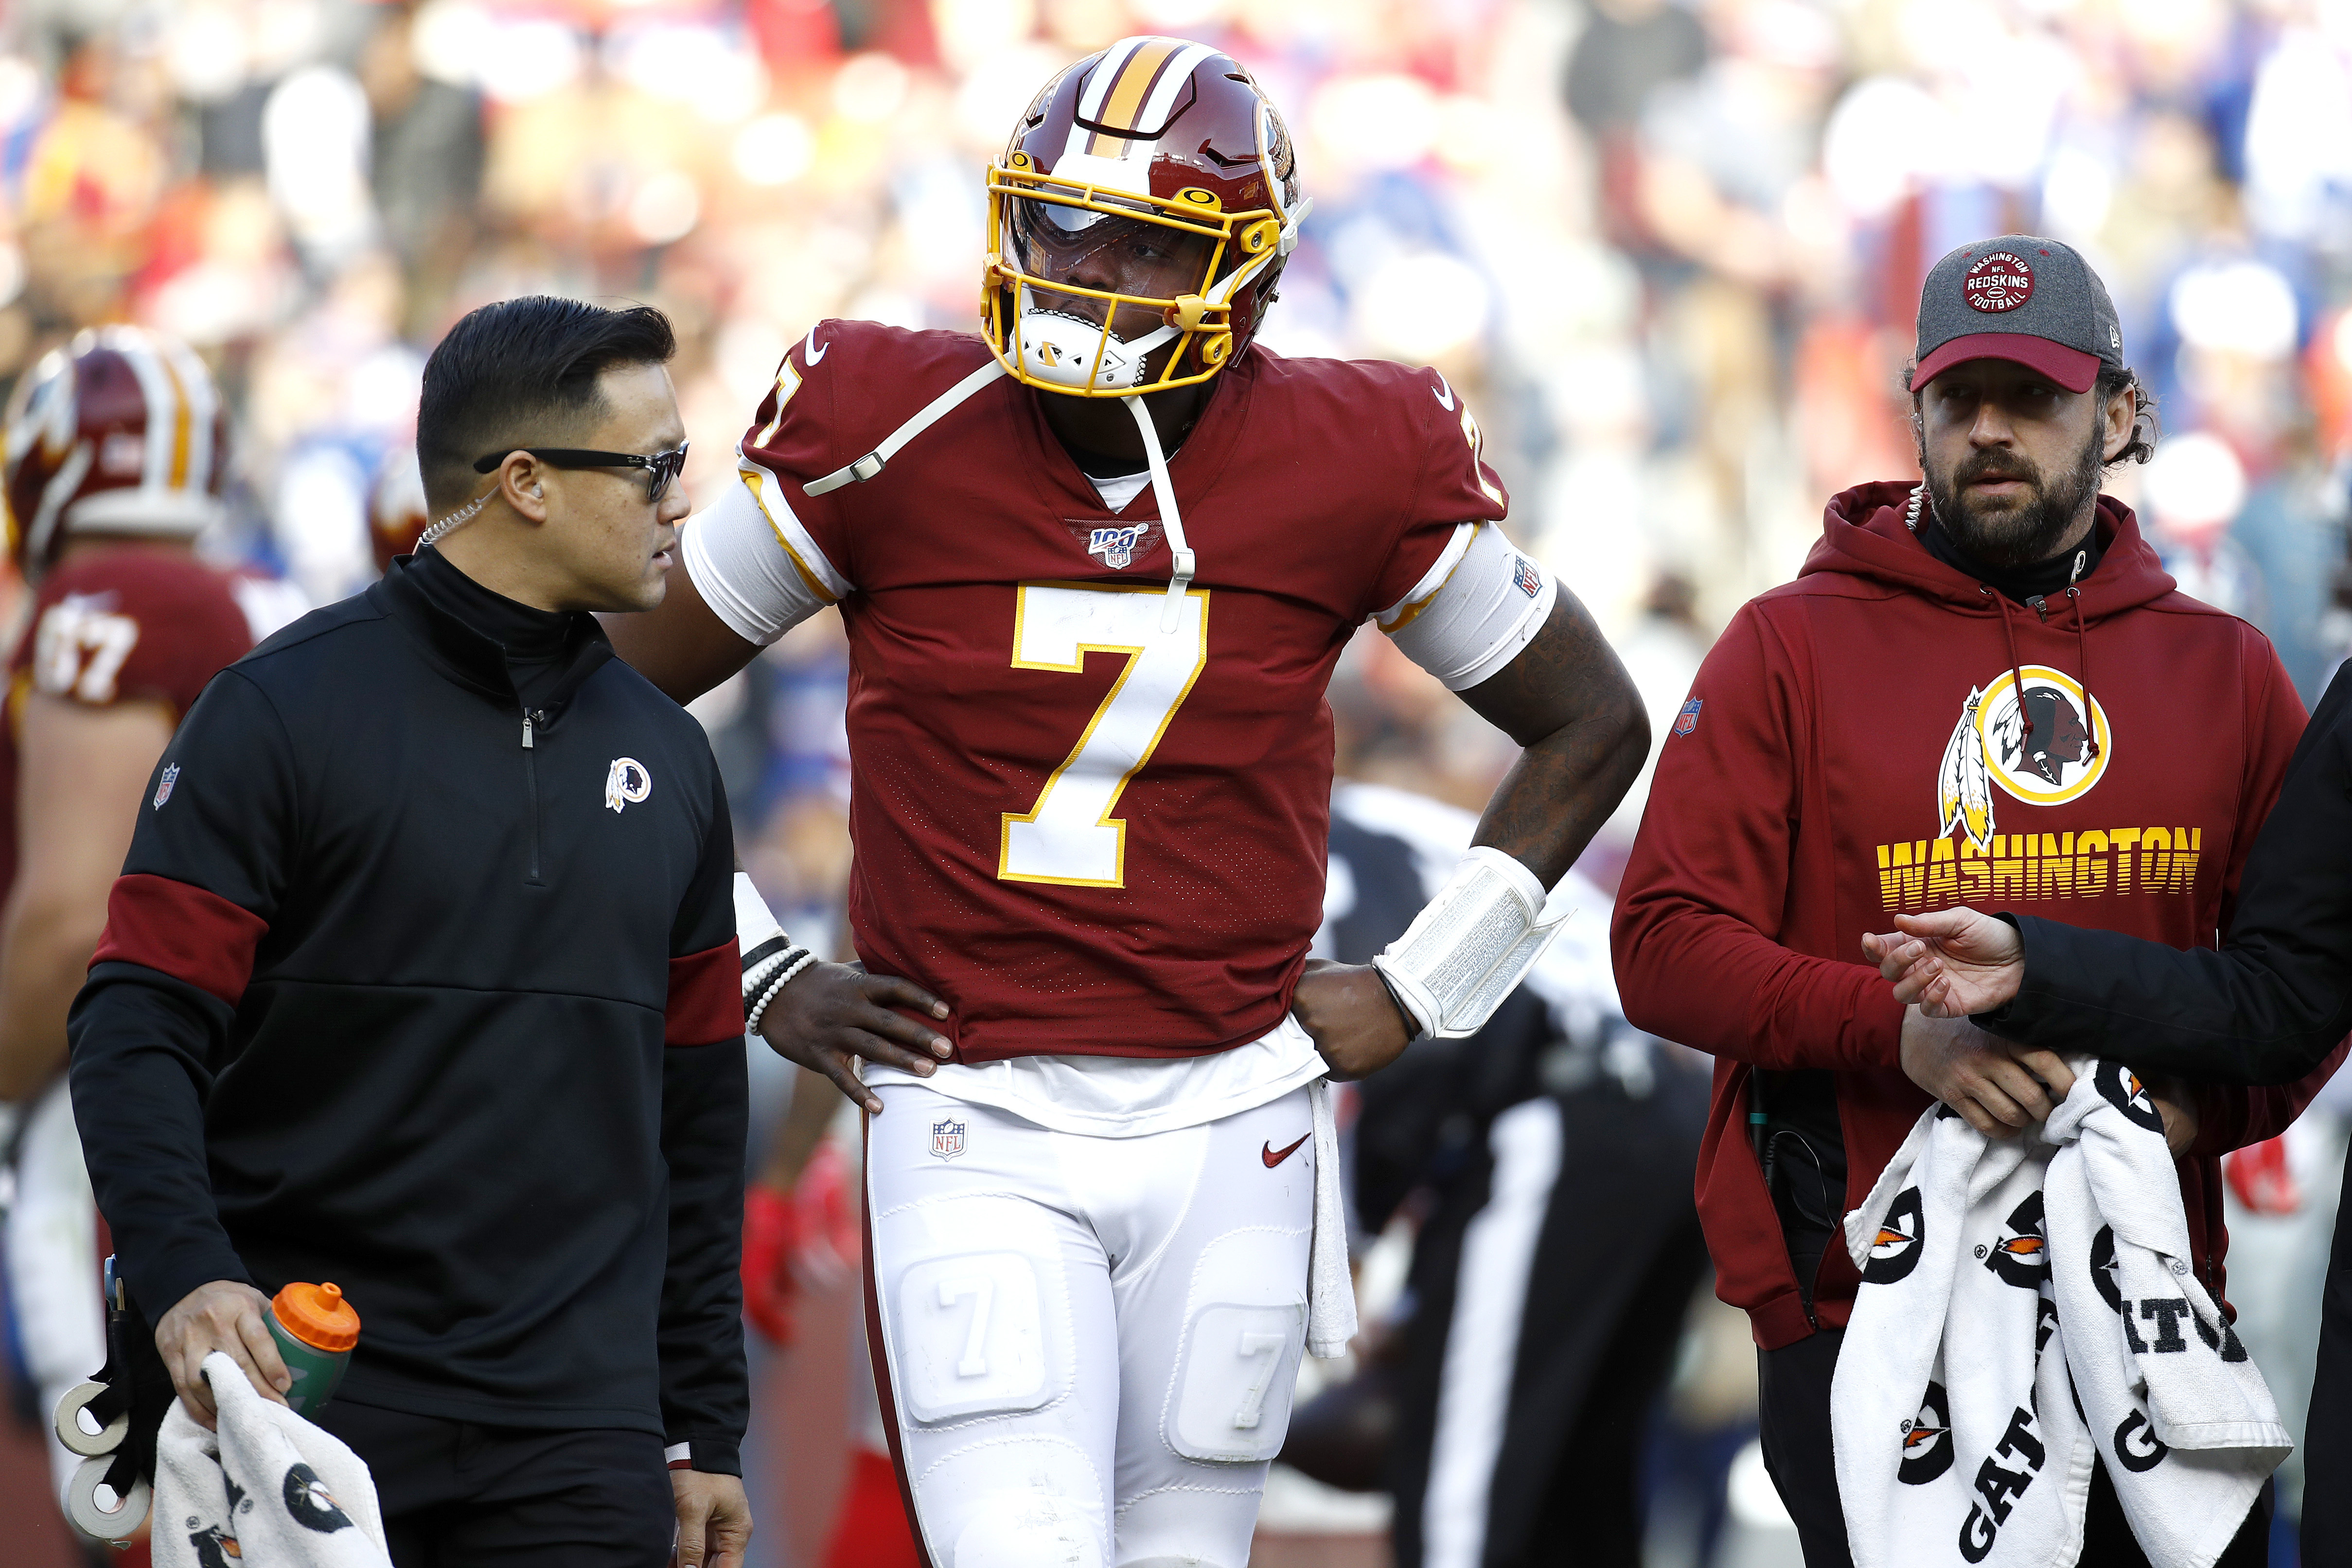 Redskins' Haskins out for Cowboys game with ankle injury